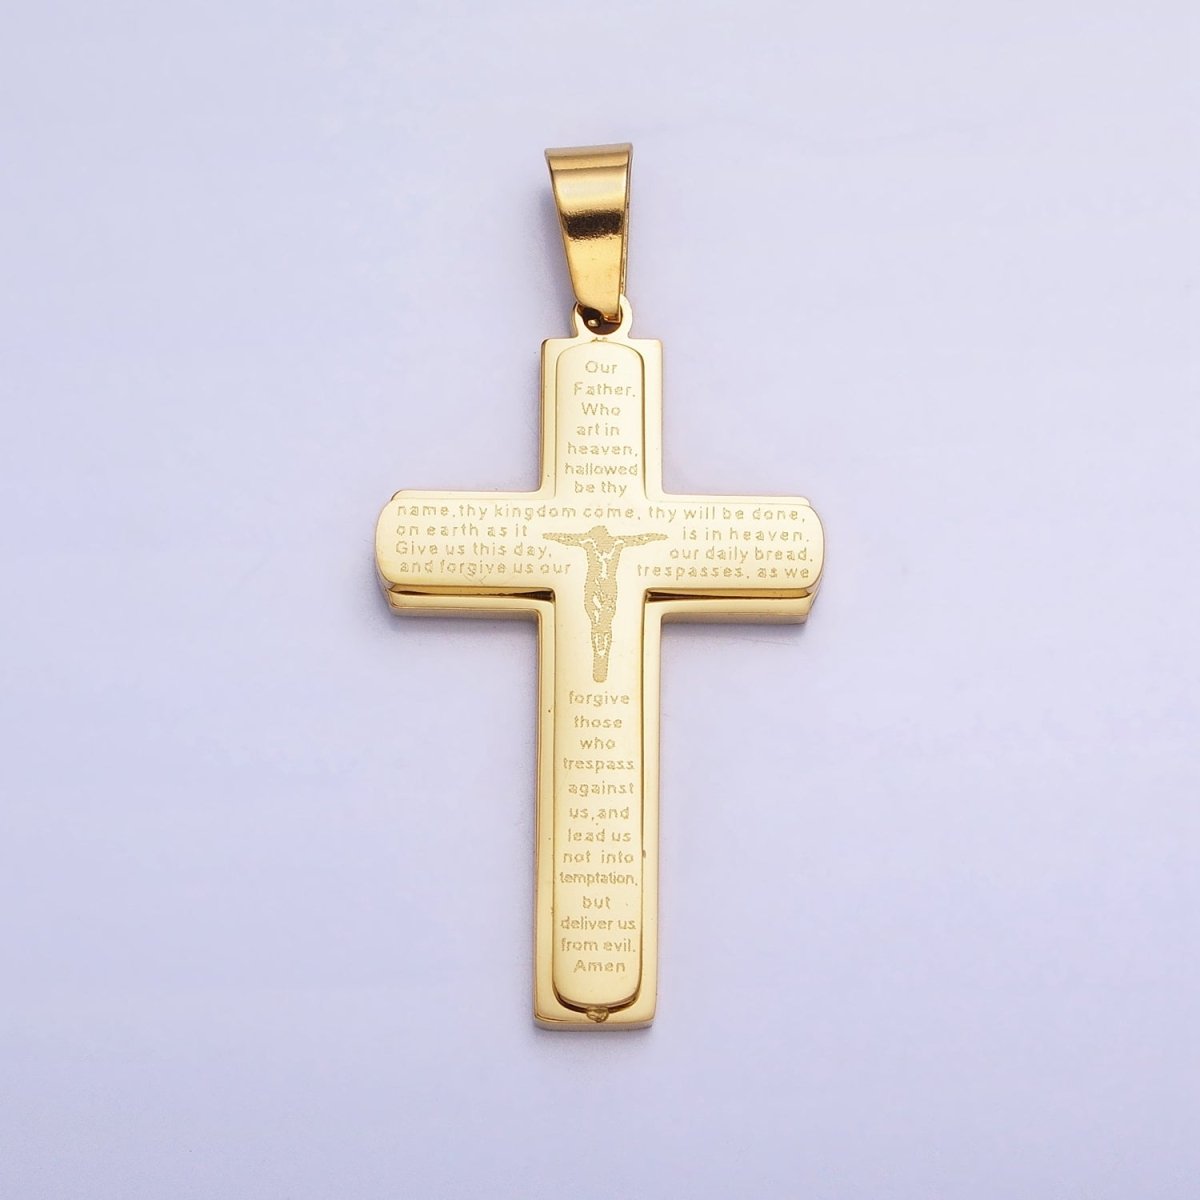 Lord Pray Pendant in Cross Charm 24K Gold Filled Engraved Our Father English Prayer Medallion for Religious Unisex Jewelry Making P-1115 - DLUXCA